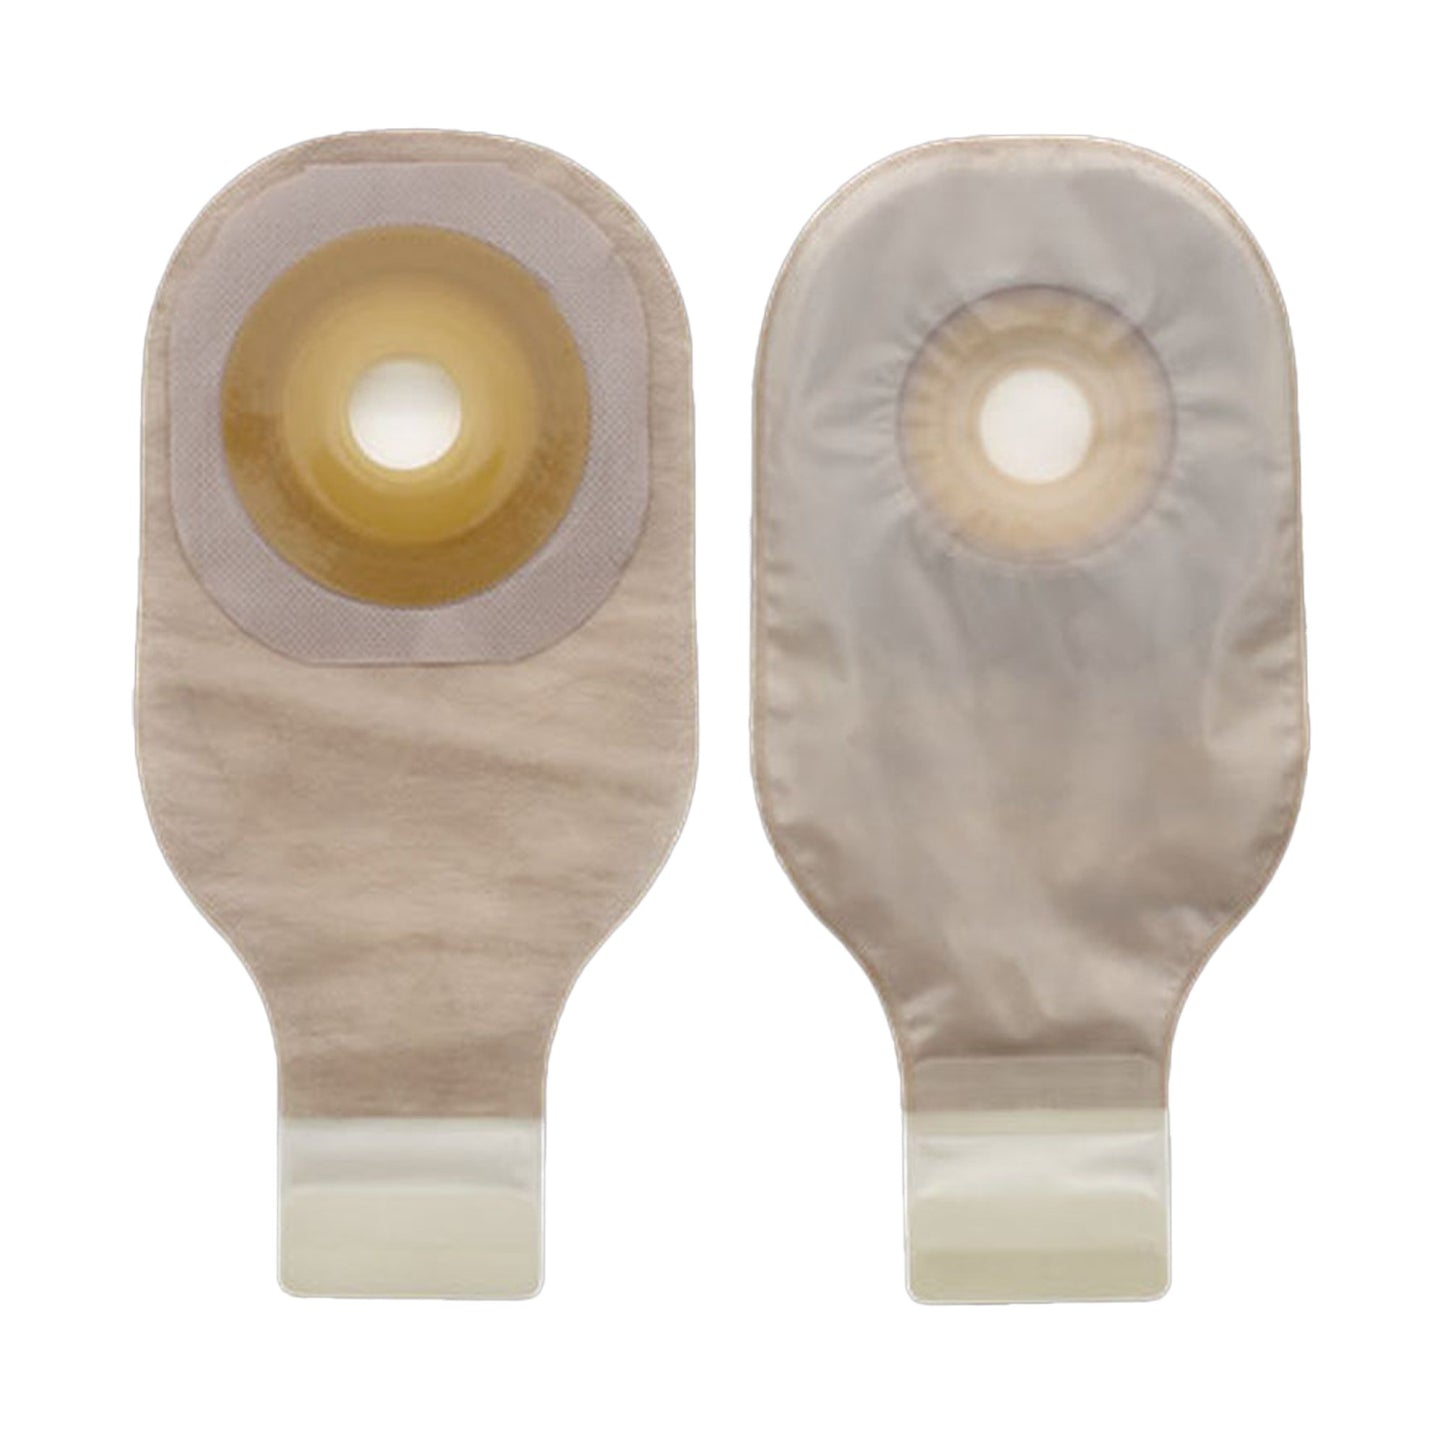 Premier™ One-Piece Drainable Transparent Colostomy Pouch, 12 Inch Length, 1 Inch Flange, 5 ct